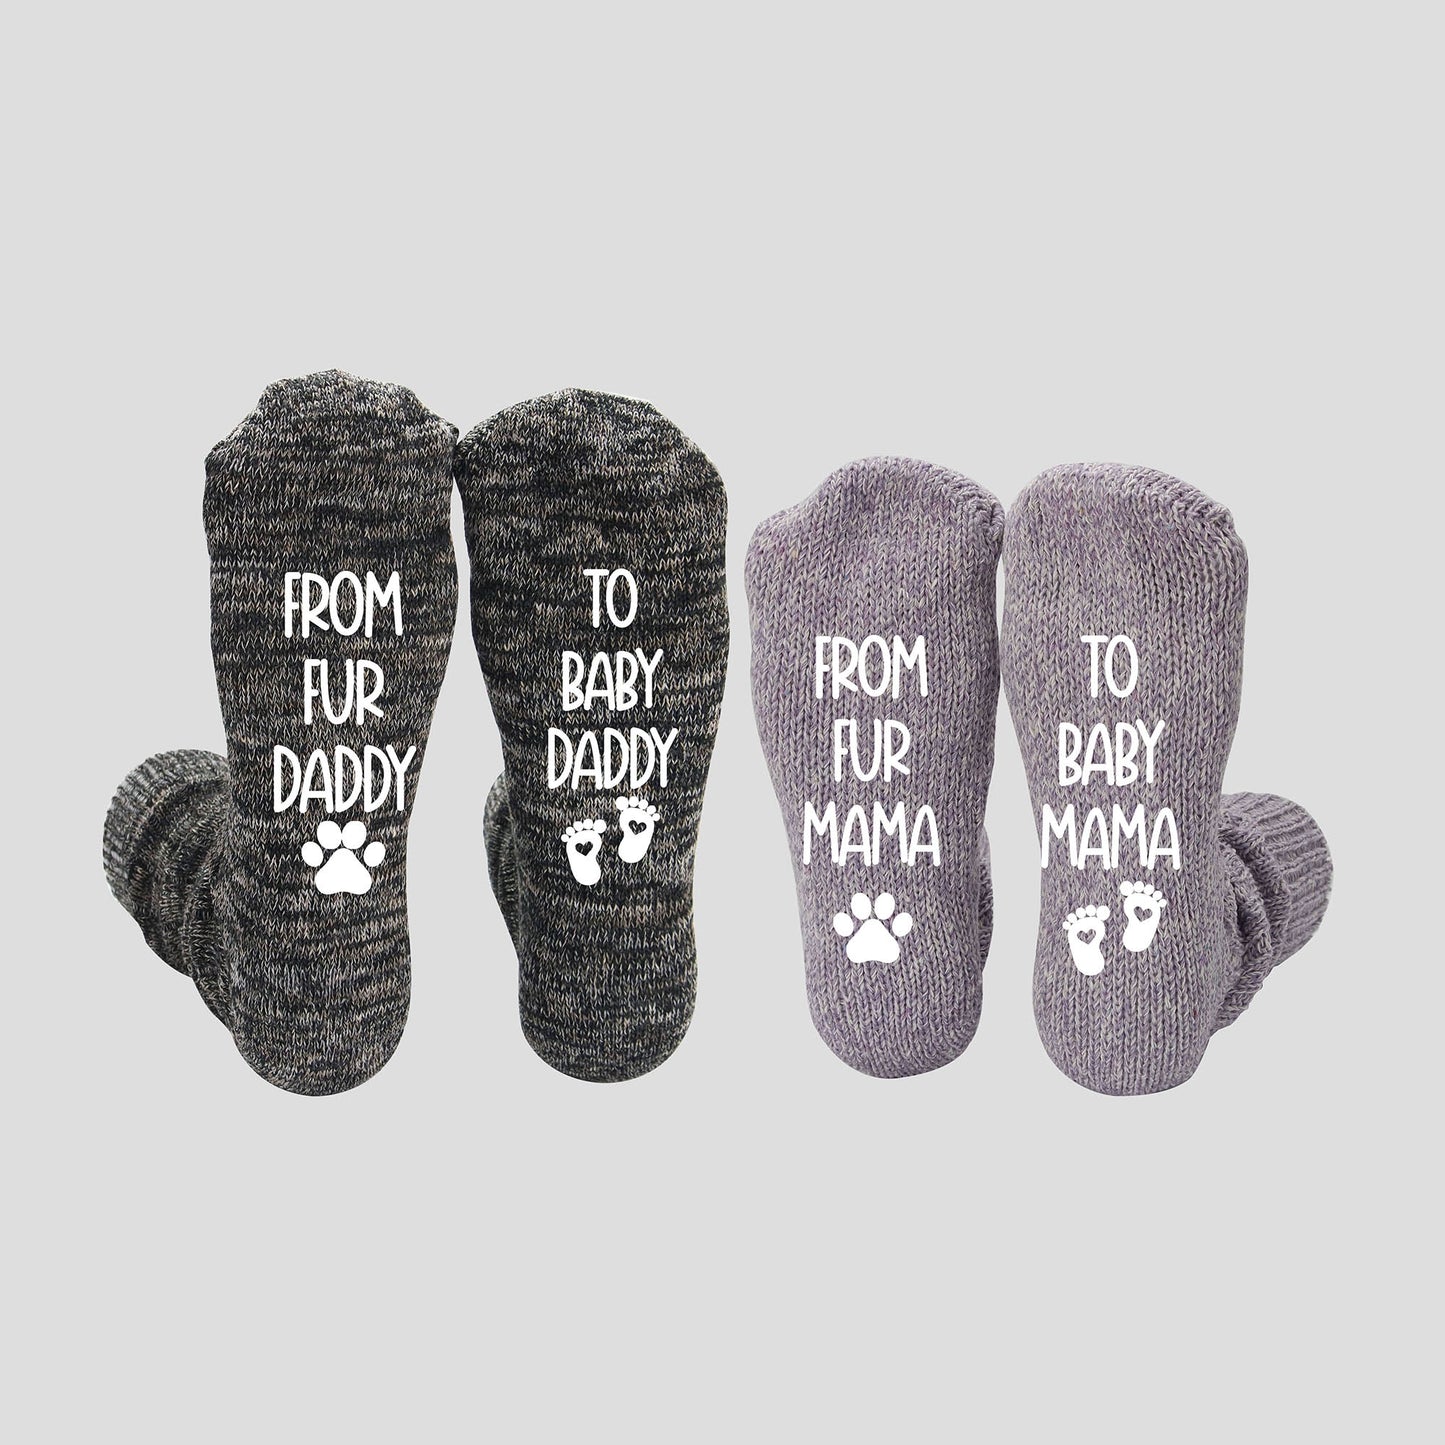 Pregnancy Socks "From Fur Mama to Baby Mama, From Fur Daddy To Baby Daddy" New Parent Sock Set